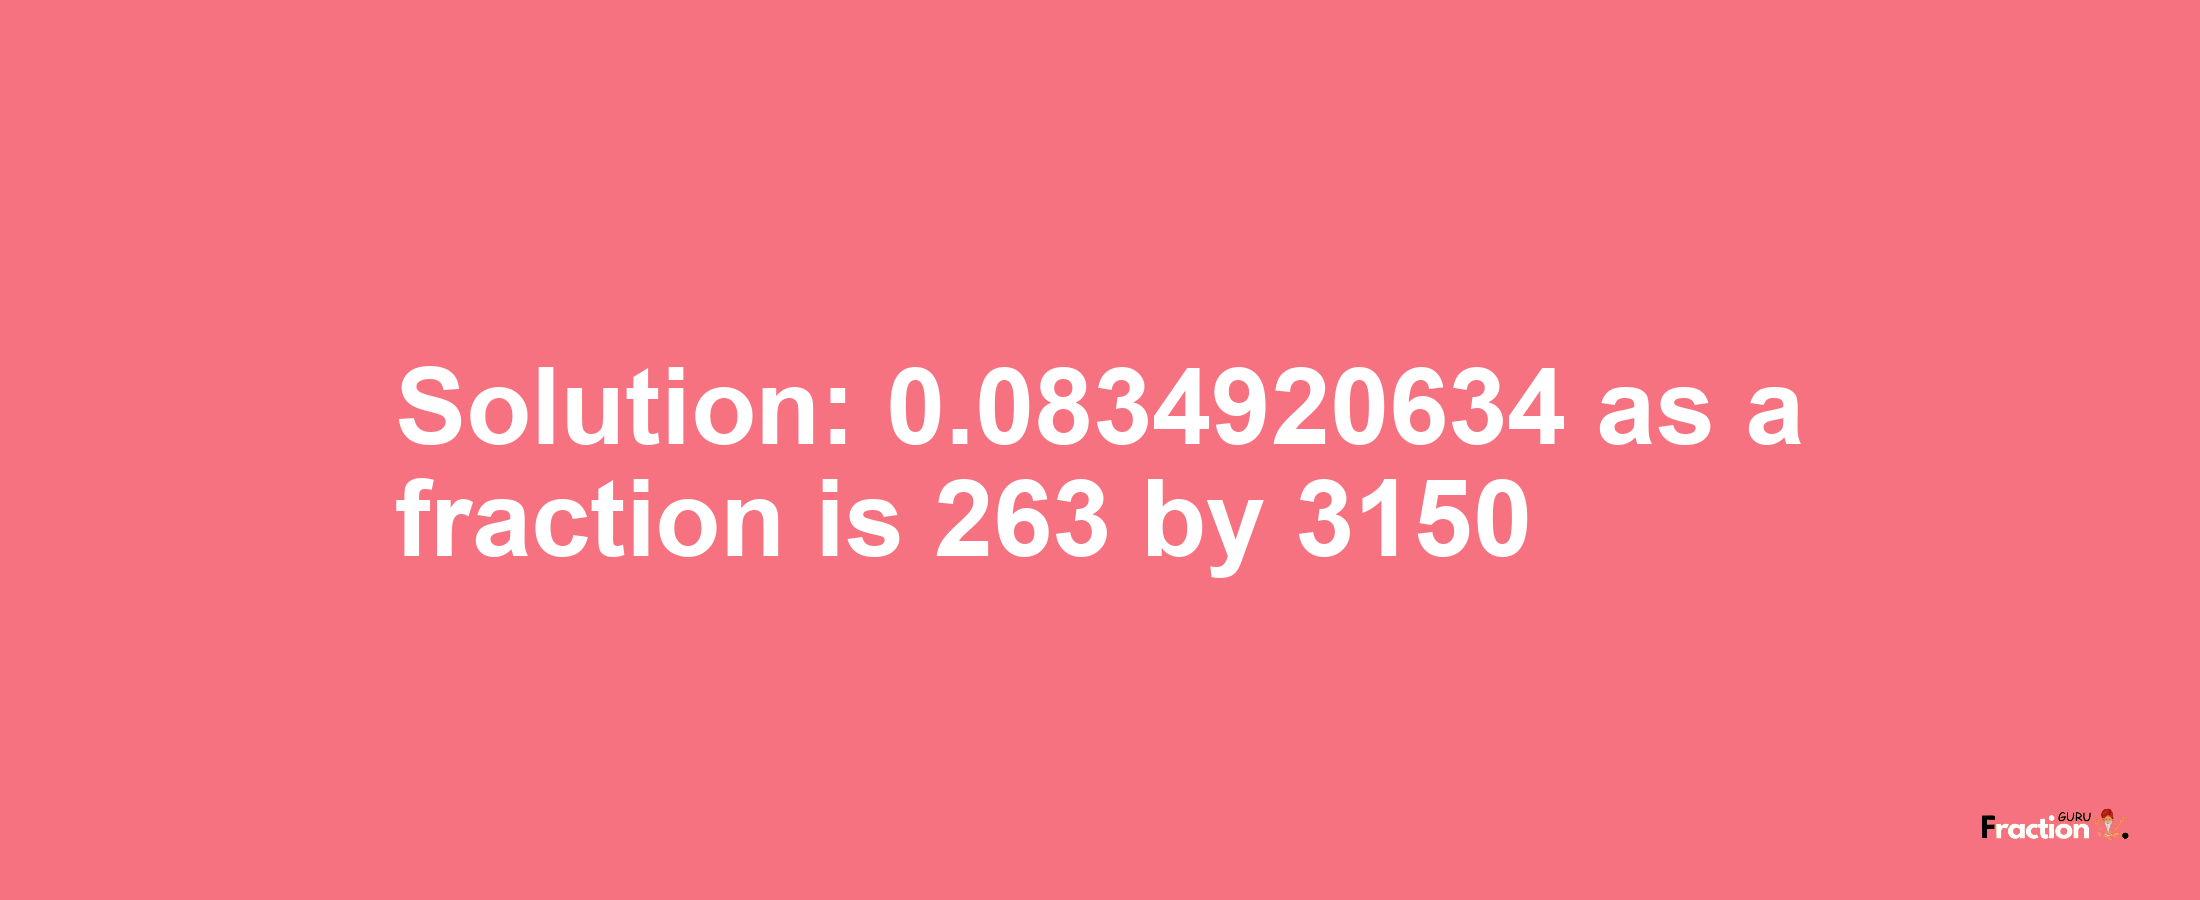 Solution:0.0834920634 as a fraction is 263/3150